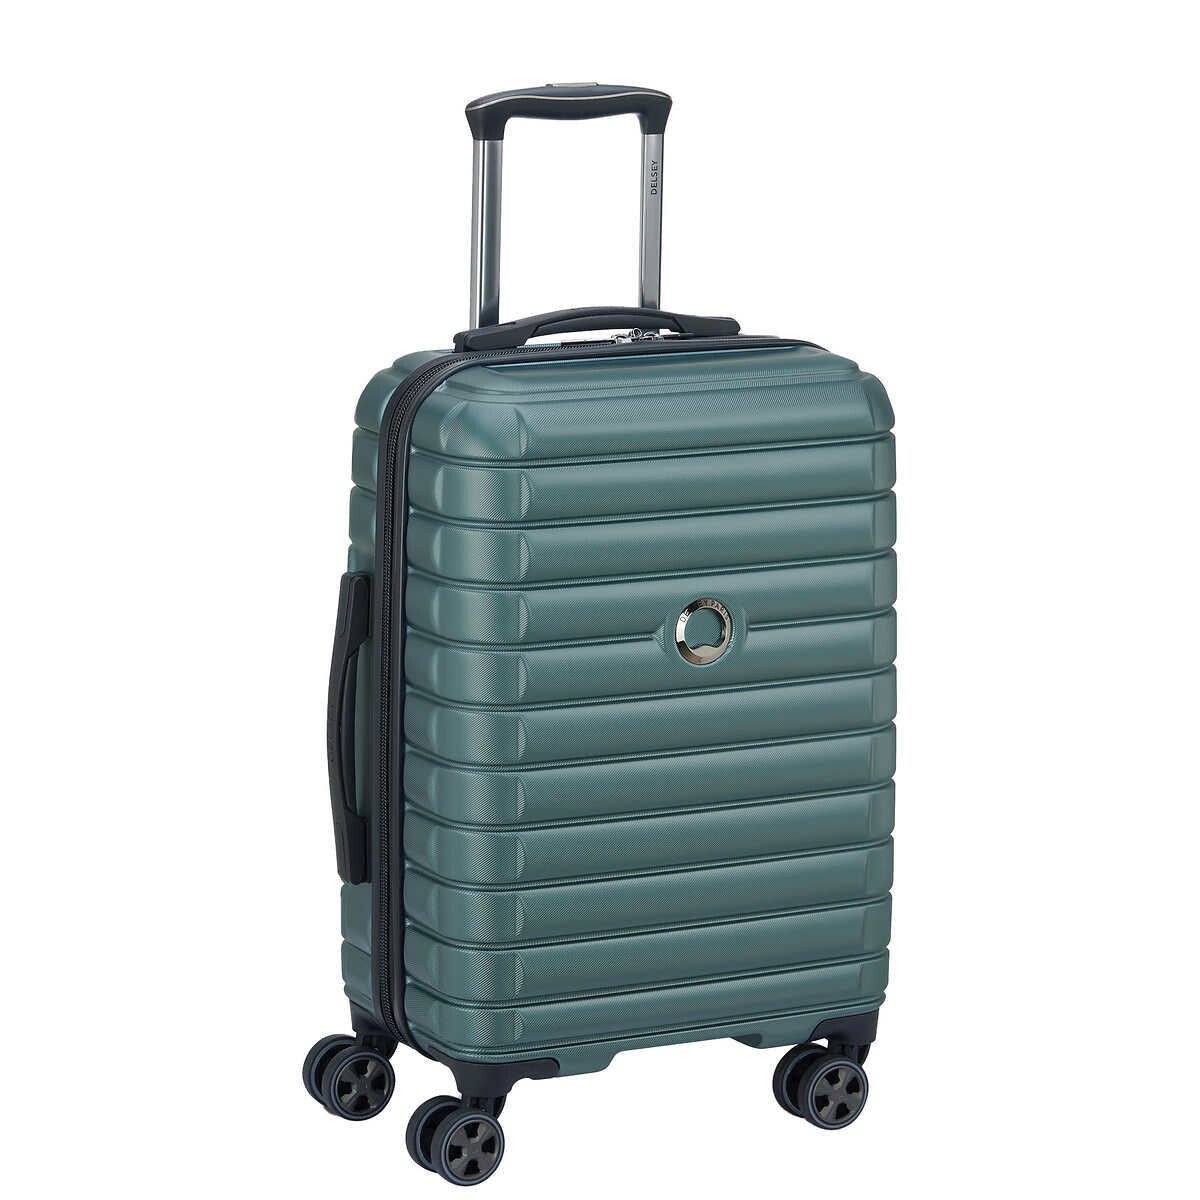 DELSEY 2PC HARSIDE LUGGAGE